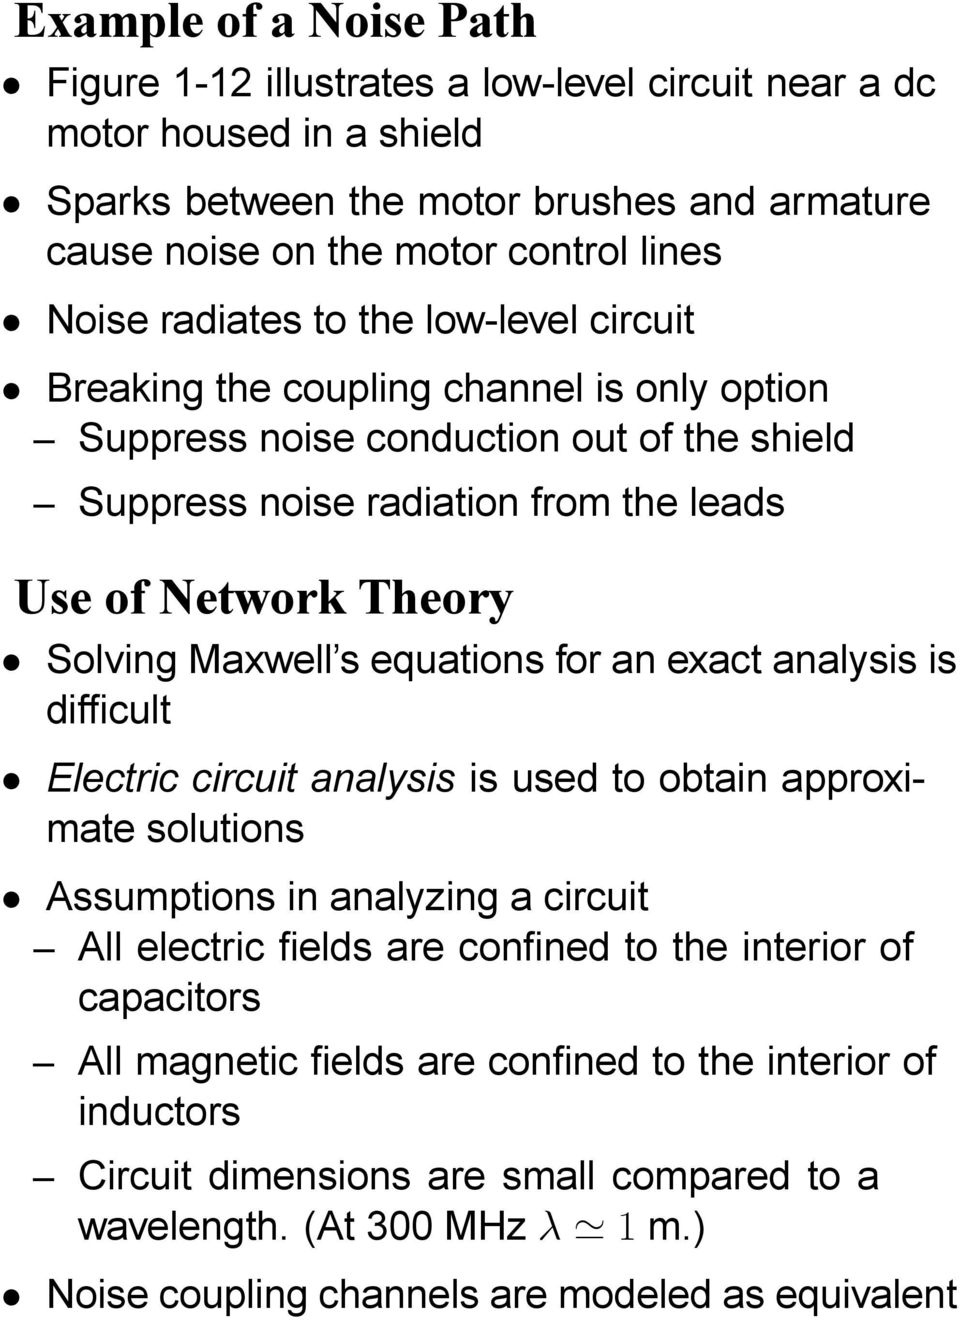 Maxwell s equations for an exact analysis is difficult Electric circuit analysis is used to obtain approximate solutions Assumptions in analyzing a circuit All electric fields are confined to the